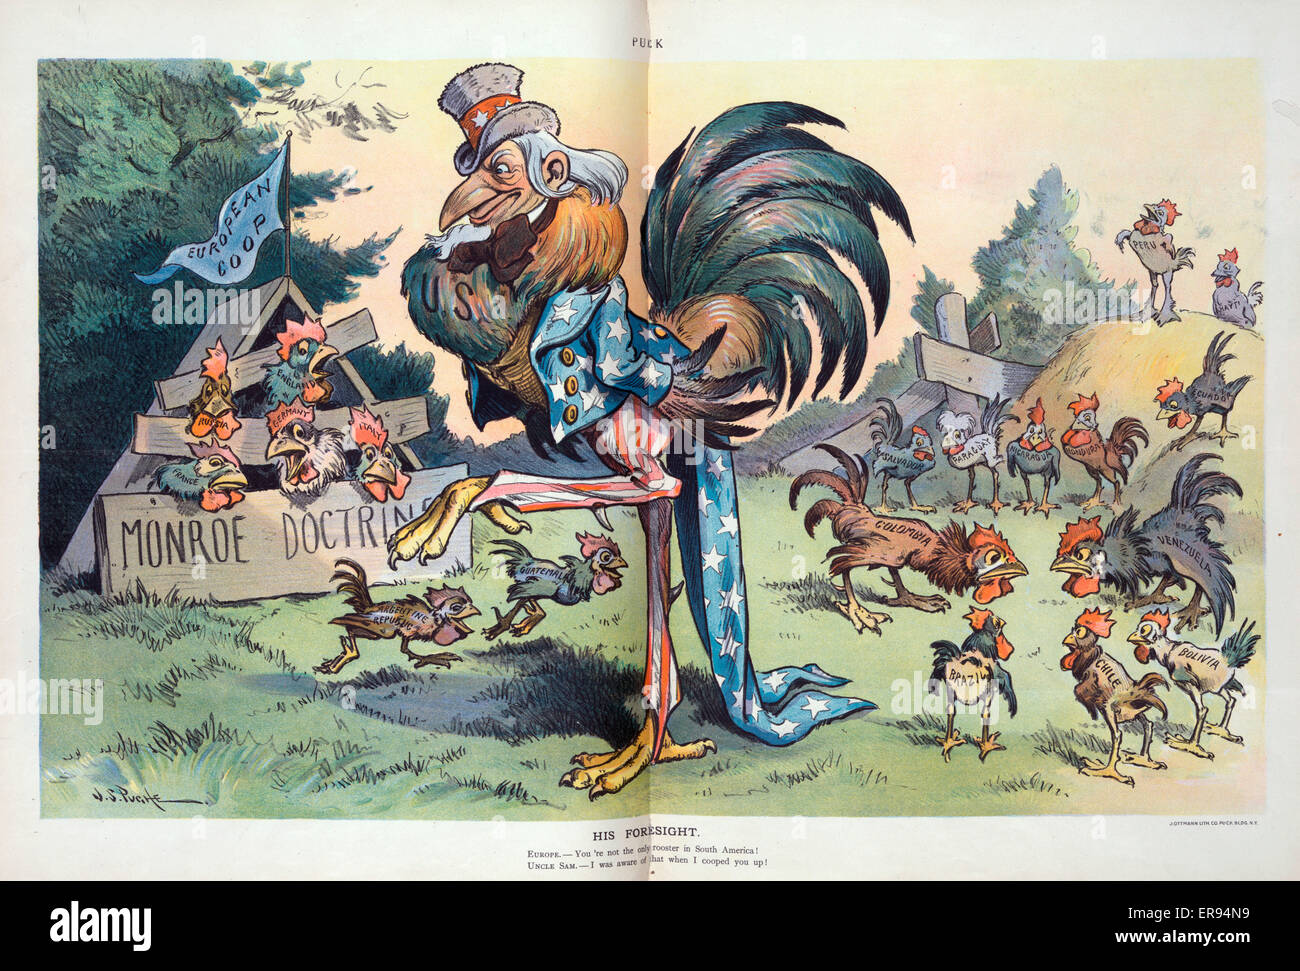 His foresight. Illustration shows Uncle Sam as a large rooster standing among several small free-ranging chicks labeled Argentine Republic, Guatemala, Brazil, Colombia, Chile, Bolivia, Venezuela, Ecuador, Honduras, Nicaragua, Paraguay, Salvador, Peru, and Stock Photo